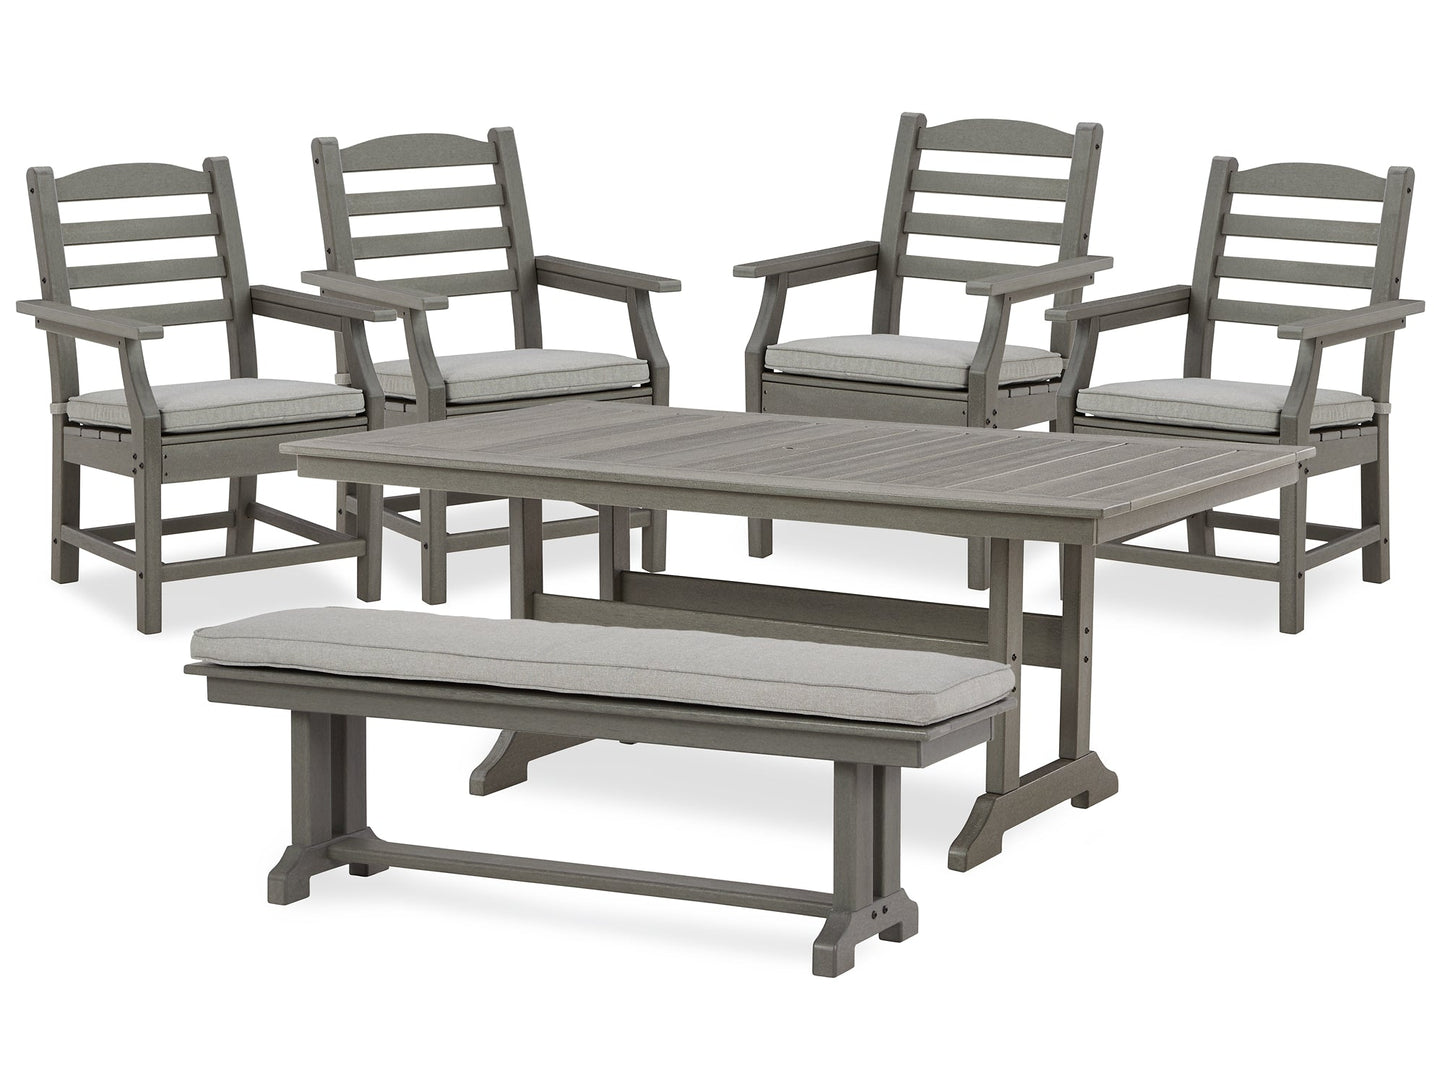 Visola Outdoor Dining Table and 4 Chairs and Bench at Cloud 9 Mattress & Furniture furniture, home furnishing, home decor